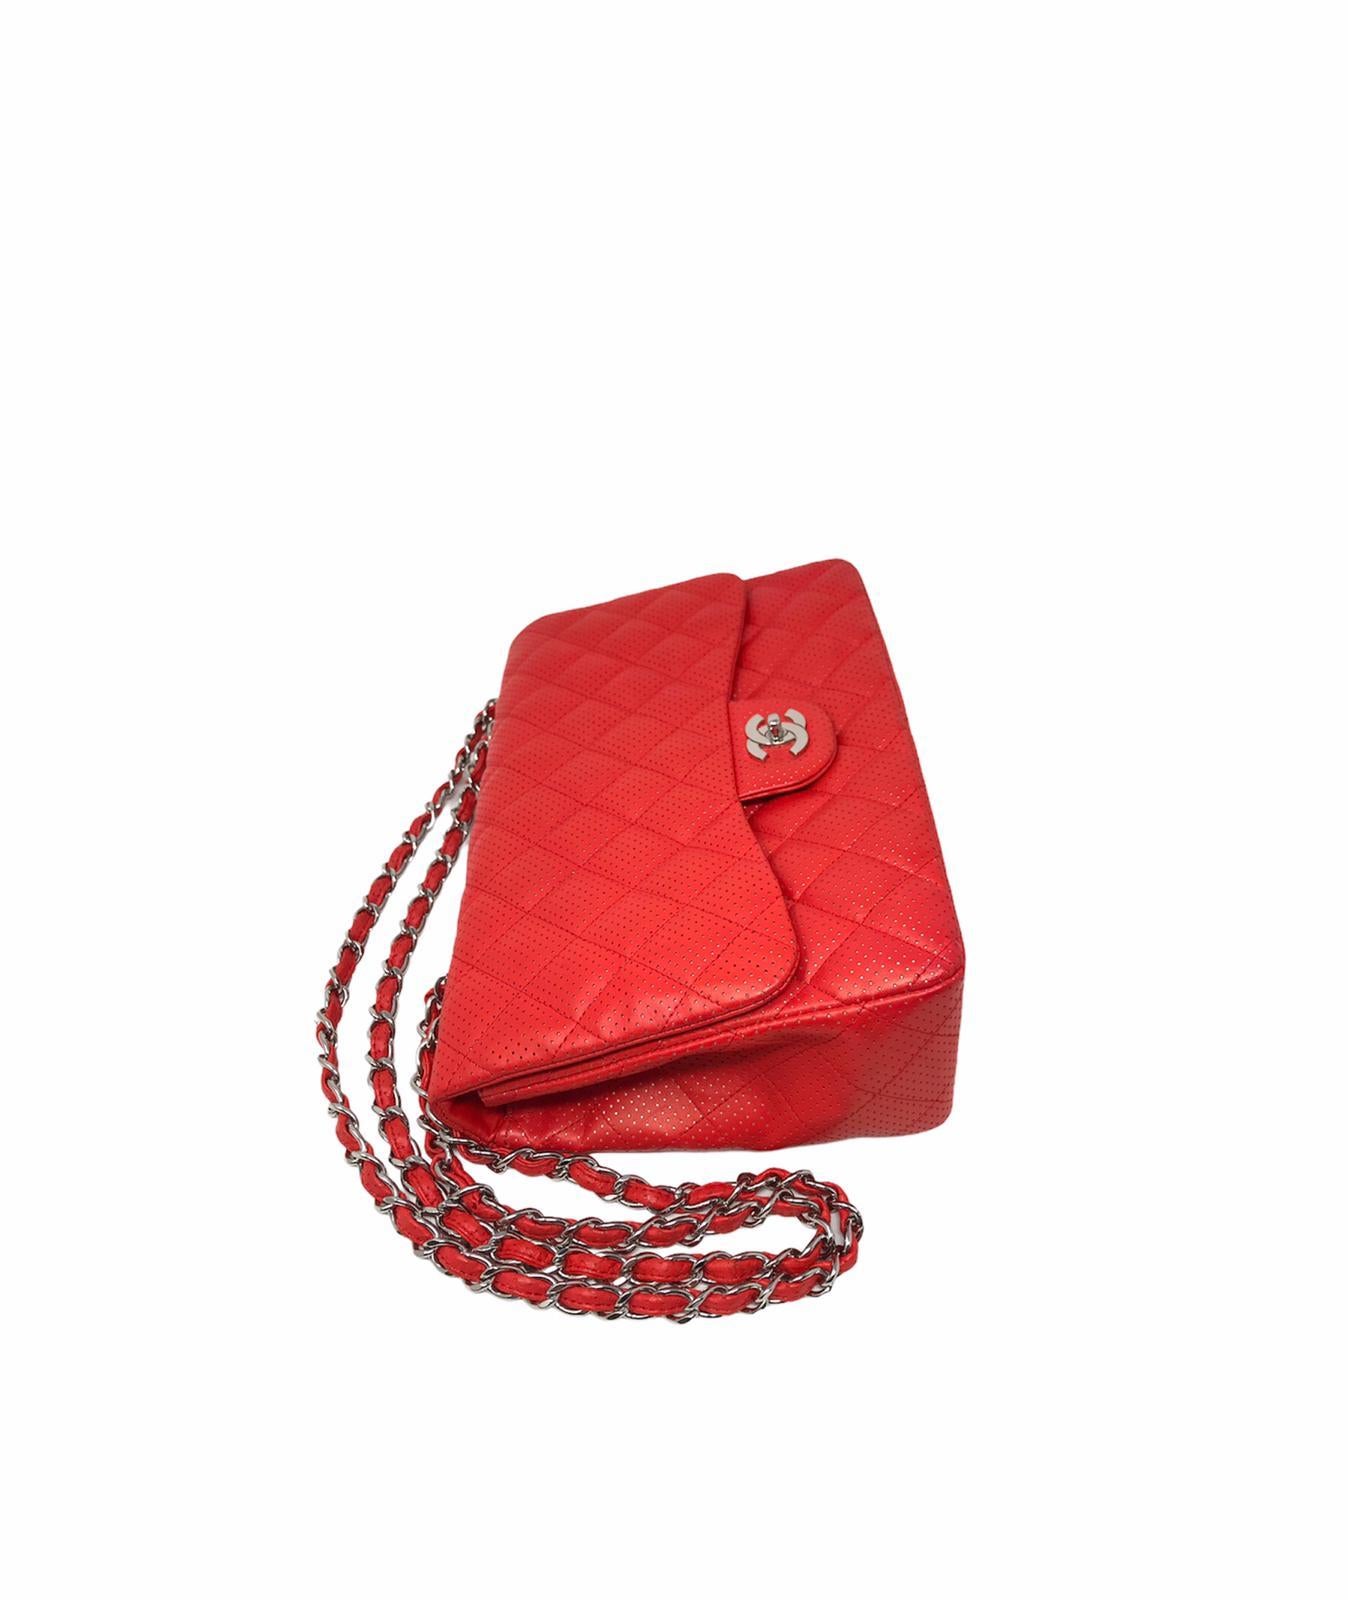 CHANEL Jumbo Red Timeless Limited Edition 2010 For Sale 1